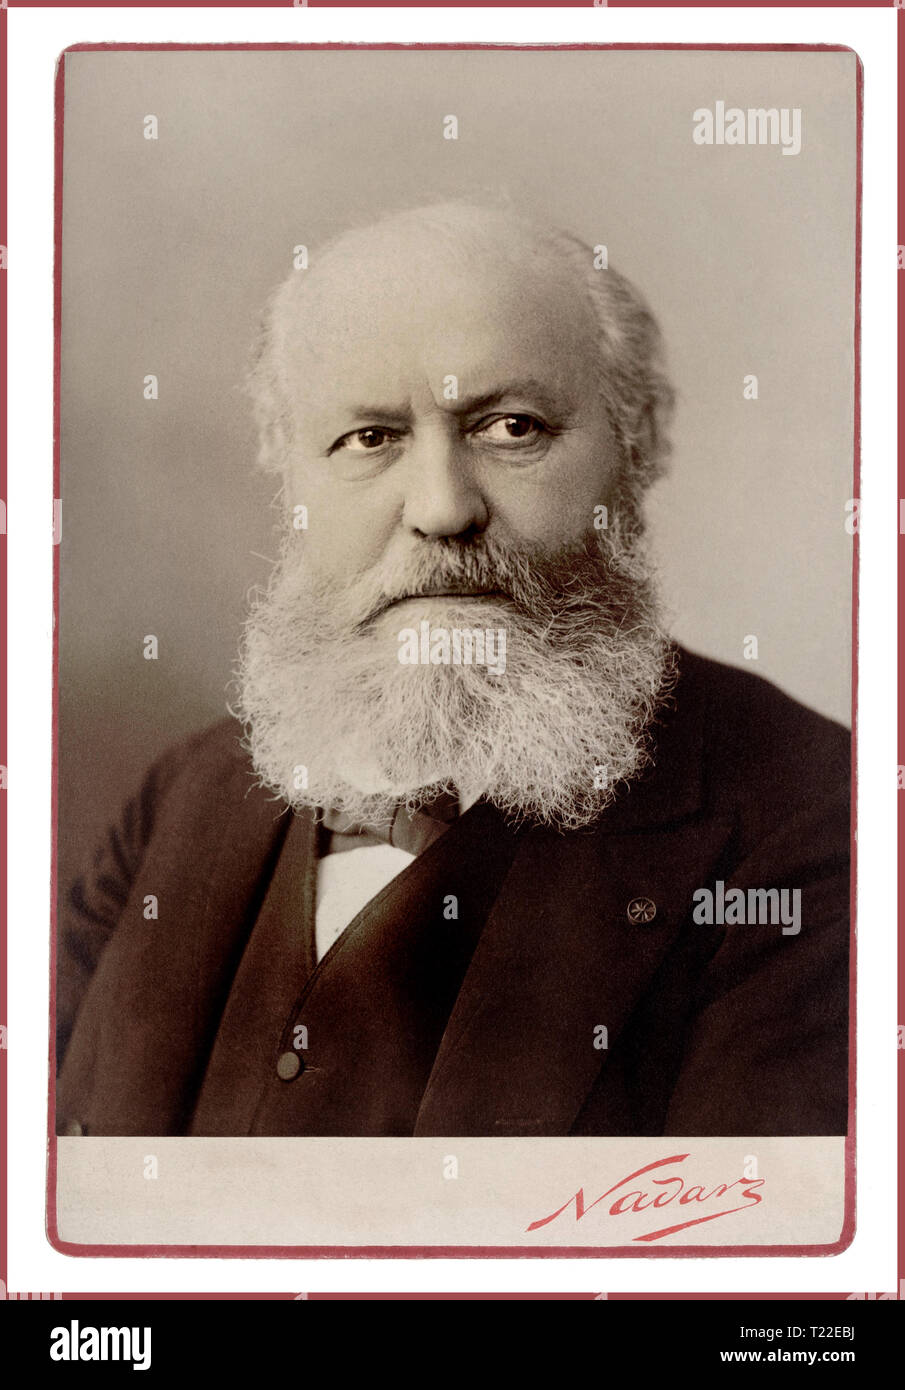 GOUNOD composer Vintage' Nadar' portrait of Charles-François Gounod a French composer, best known for his Ave Maria, based on a work by Bach, as well as his opera Faust.   Paris Studio Portrait by celebrated and innovative Photographer 'Nadar' Date 1890 Stock Photo